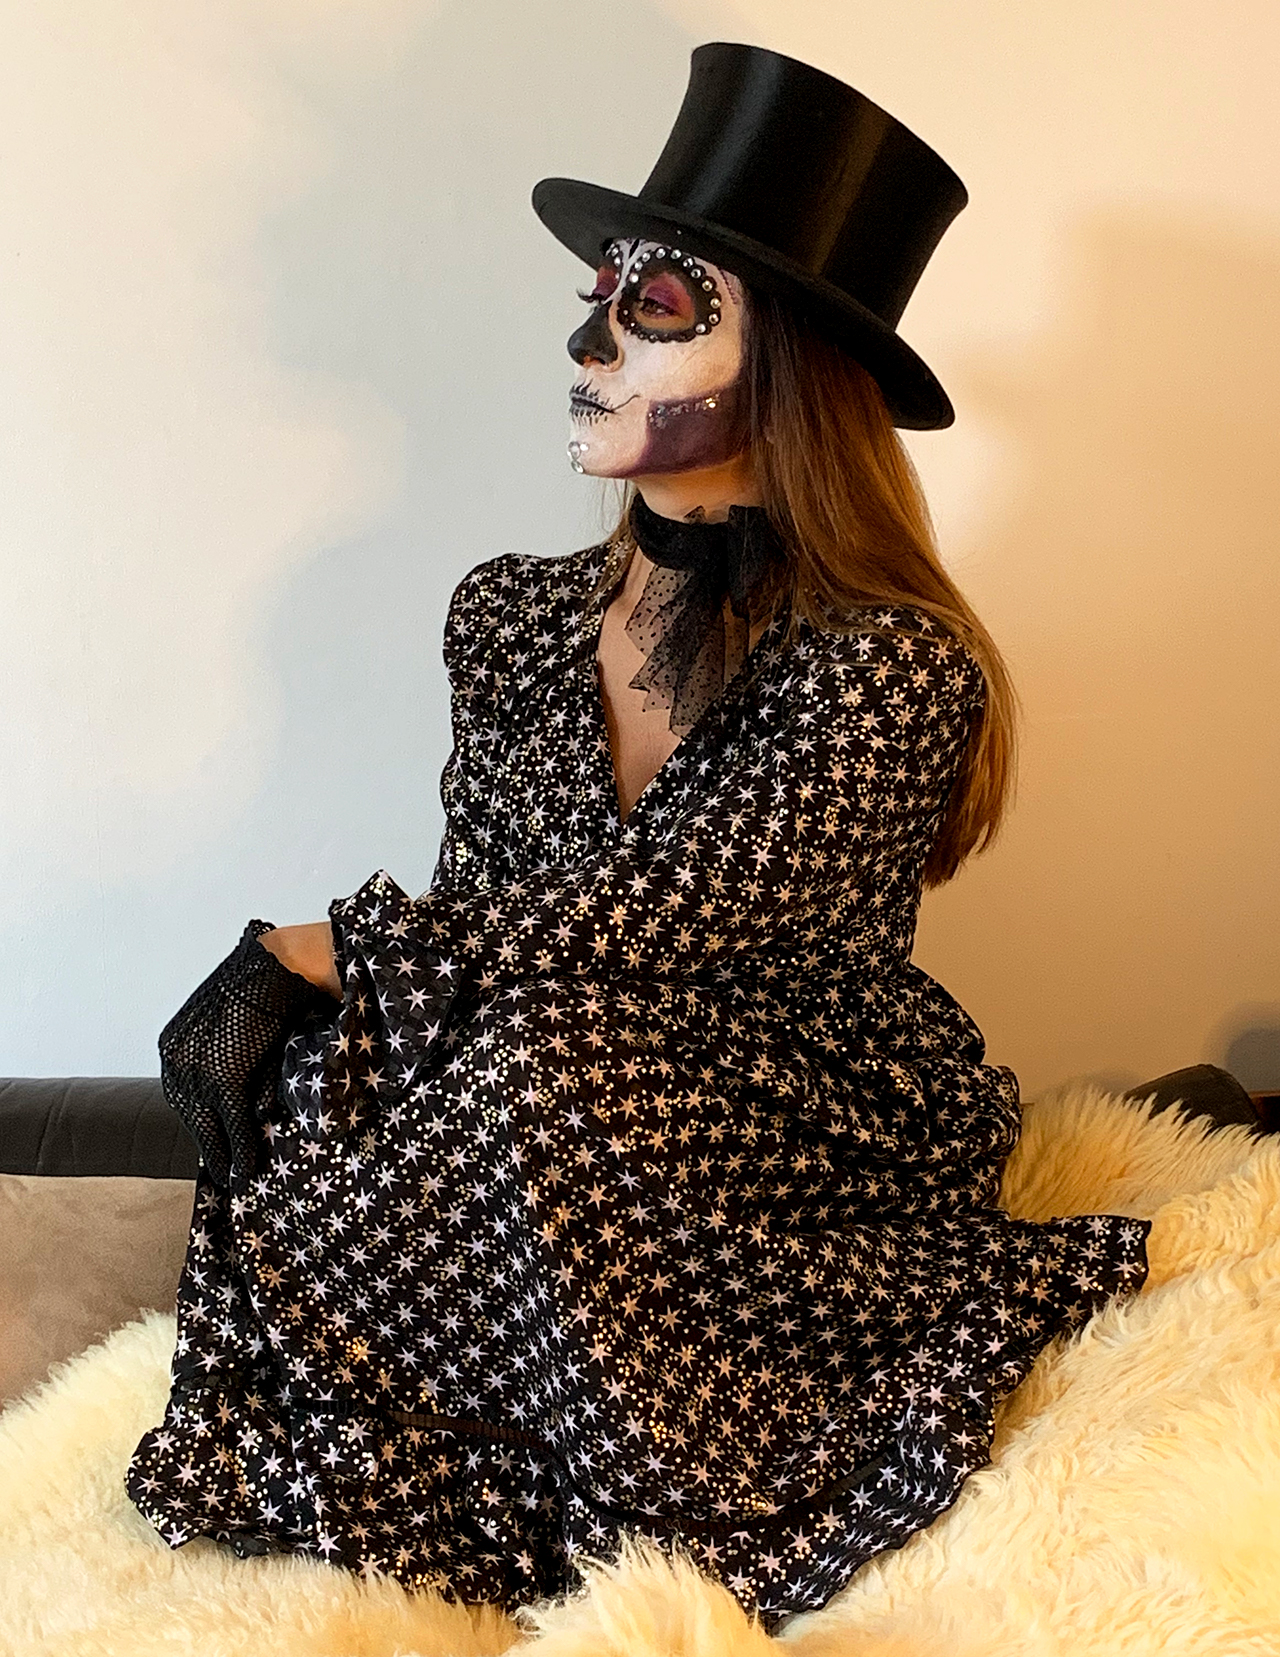 La Catrina with an authentic vintage top hat